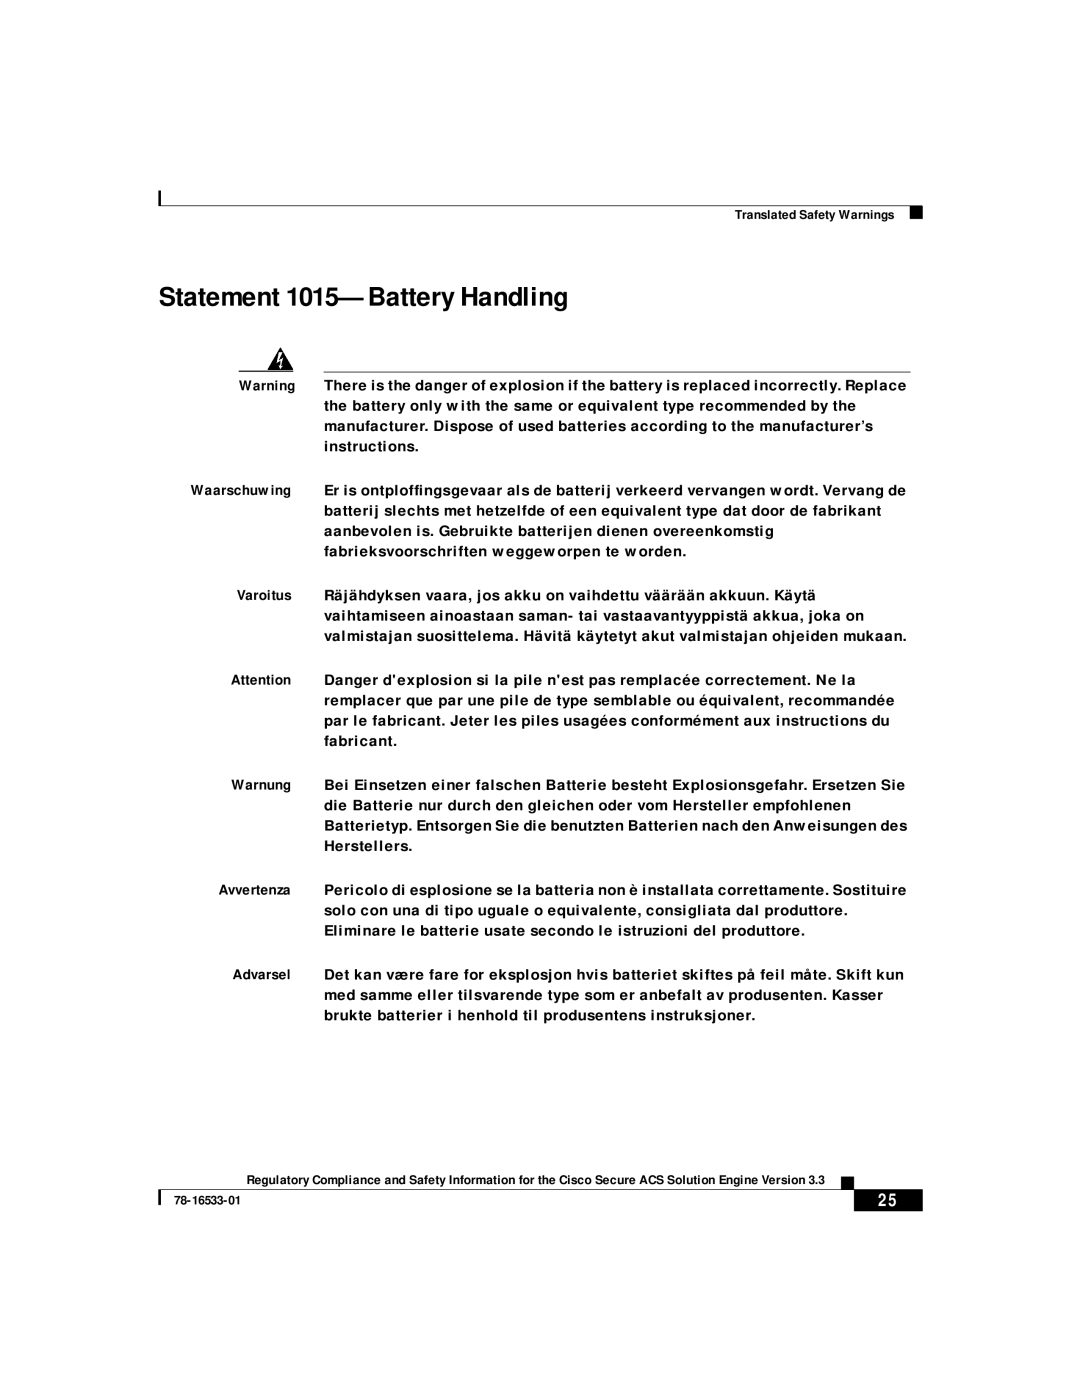 Cisco Systems CSACSE-1112-K9 manual Statement 1015-Battery Handling 